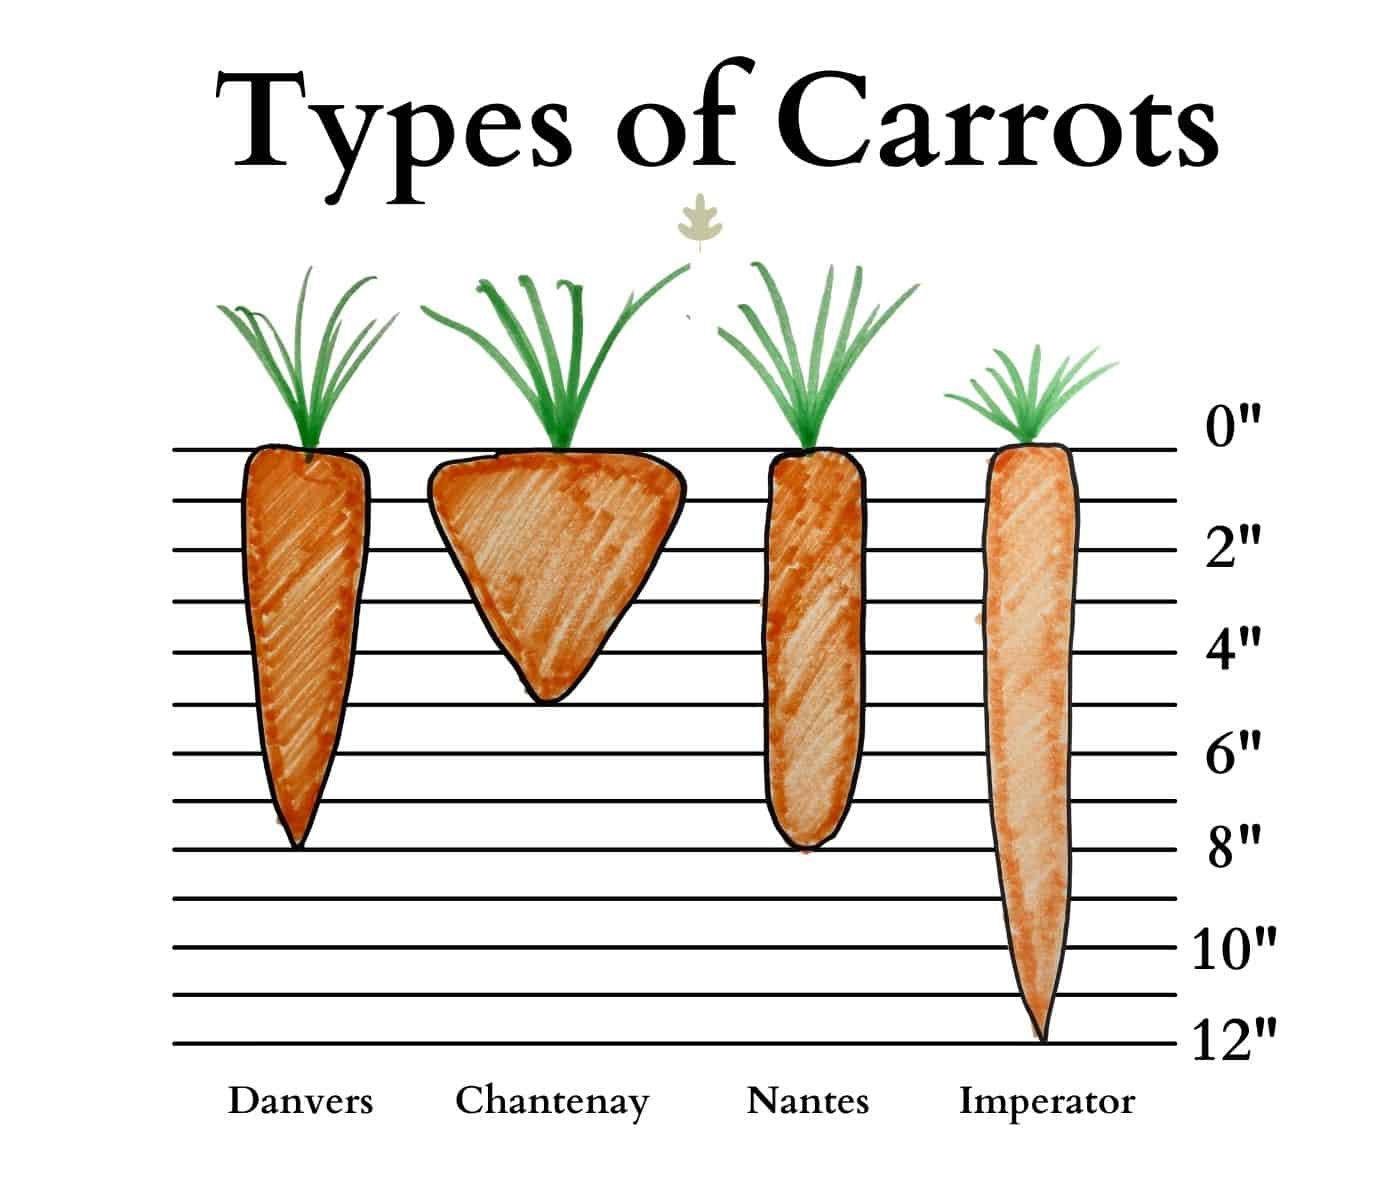 Types of carrots - graphic showing shape and size of popular carrot varieties